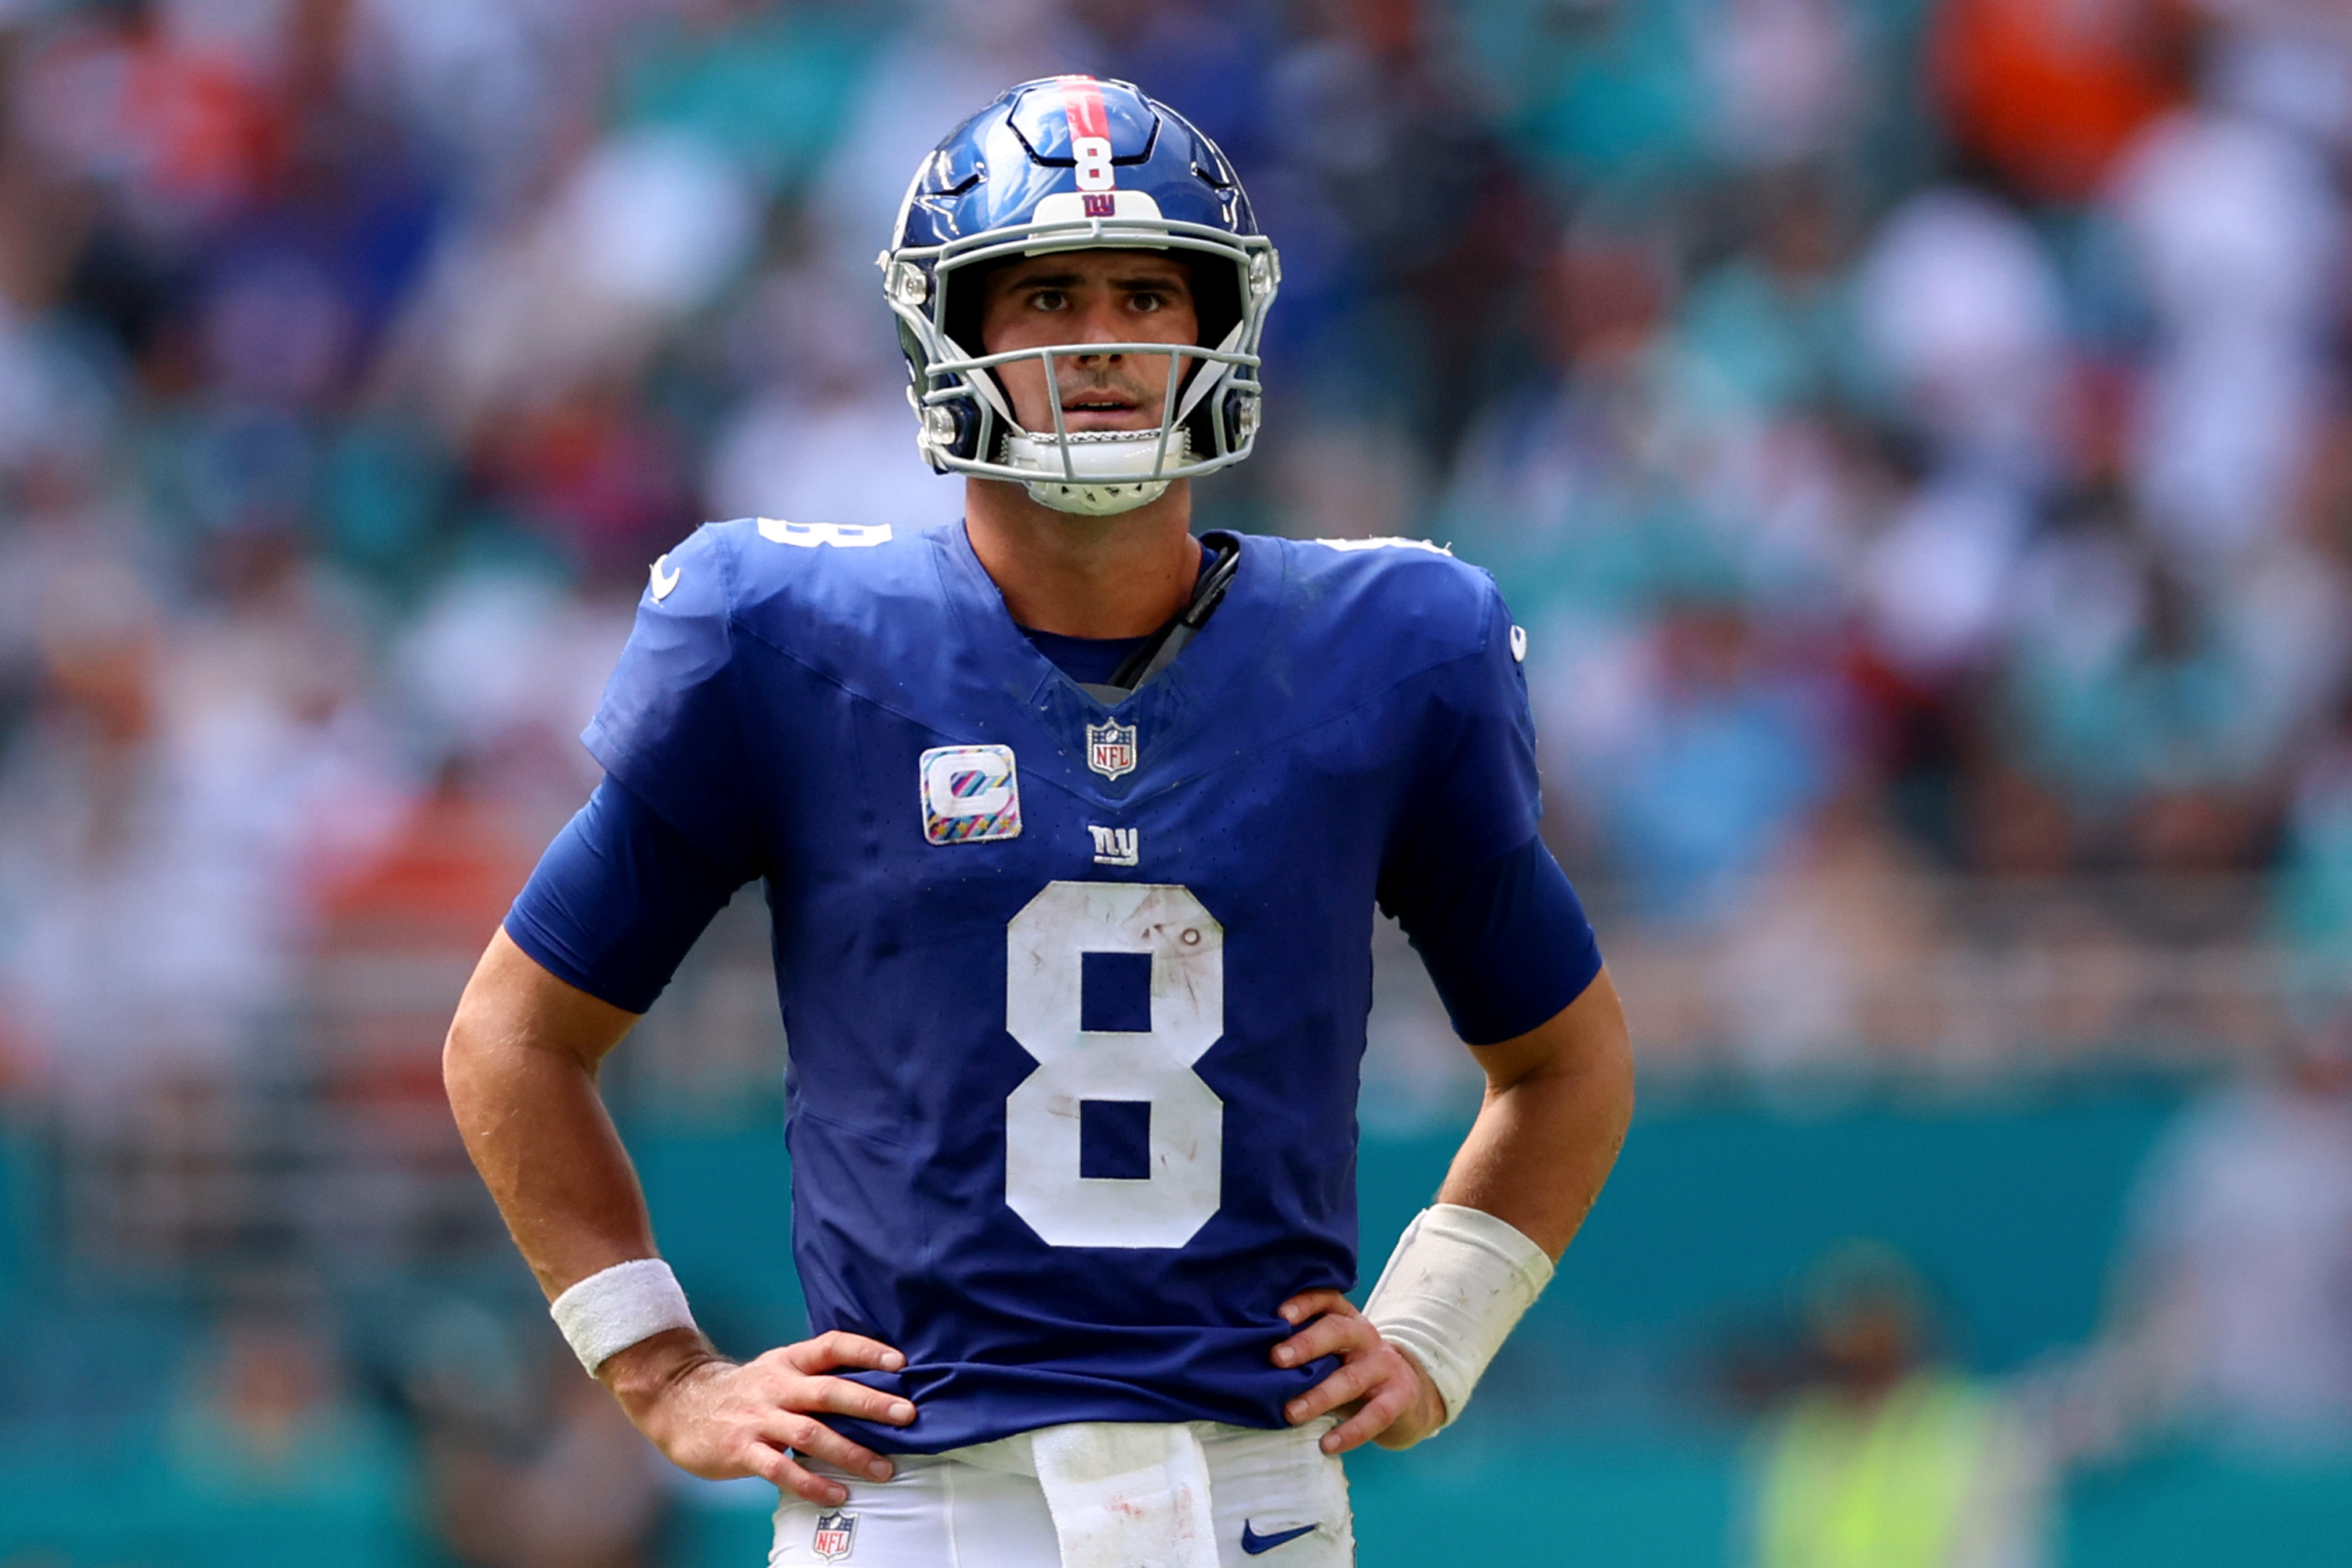 Giants vs. Cowboys, Week 1: Everything you need to know - Big Blue View